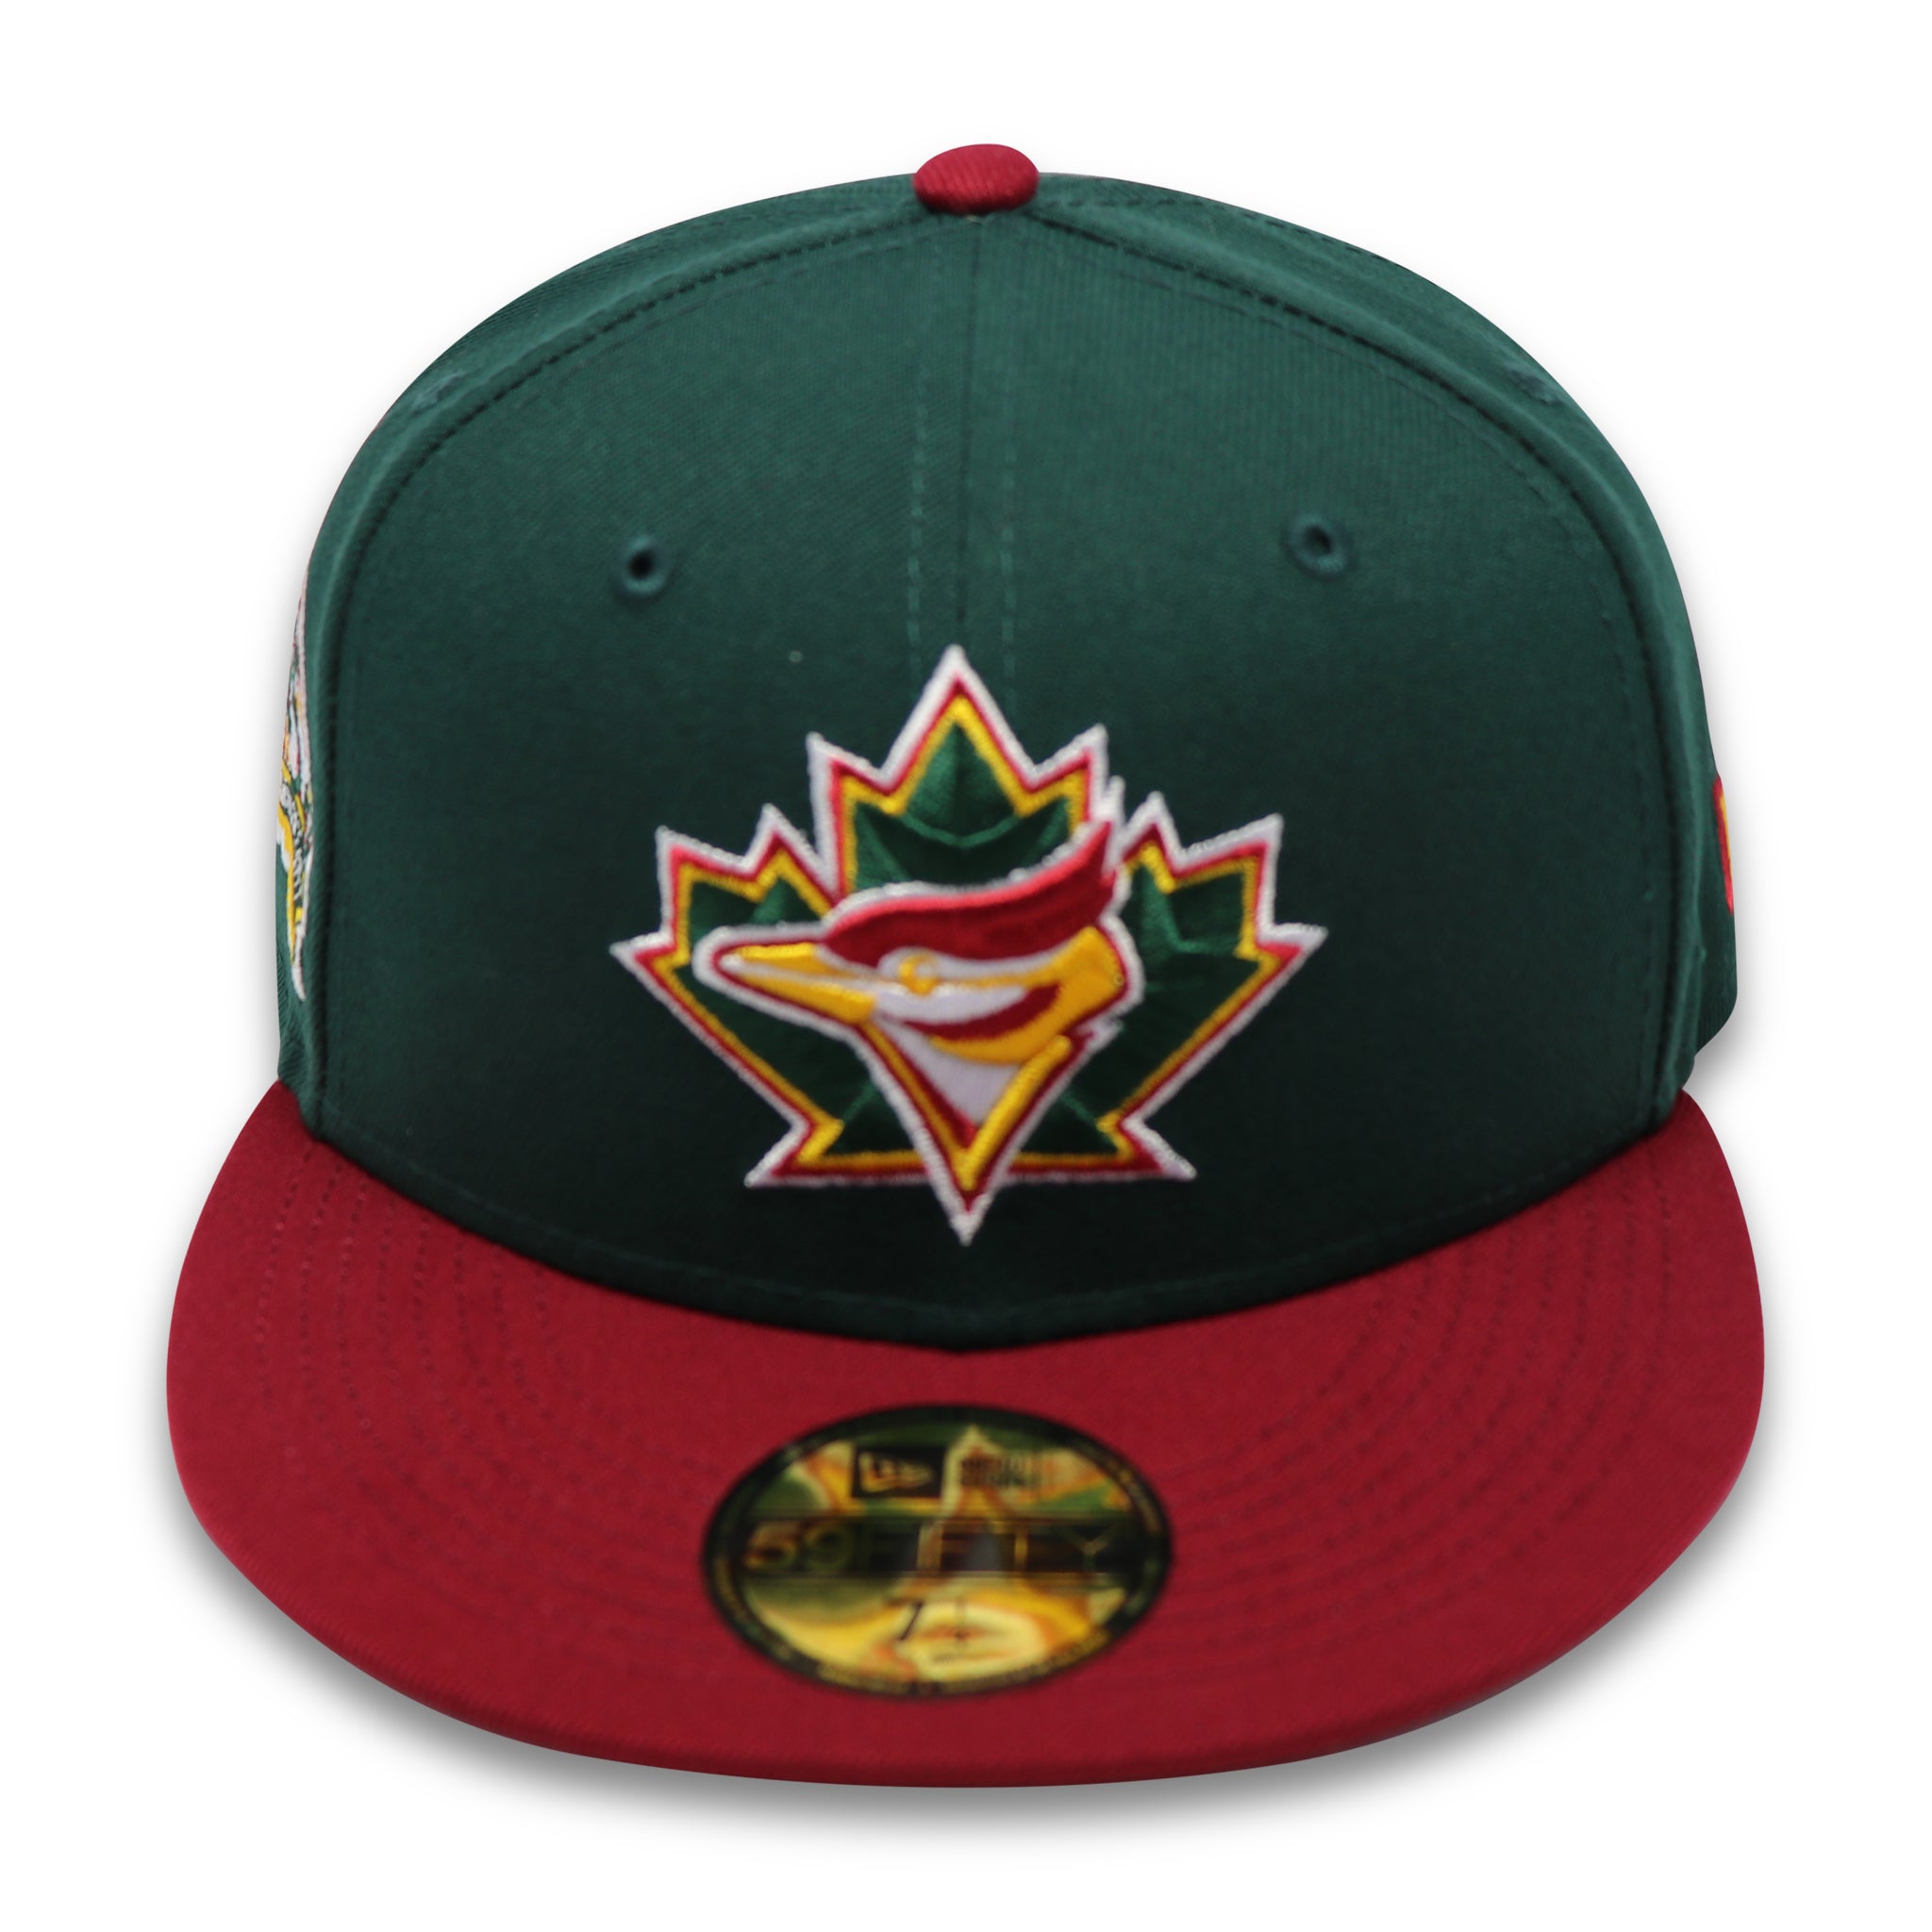 TORONTO BLUEJAYS (GREEN) "25TH SEASON" NEW ERA 59FIFTY FITTED (S)